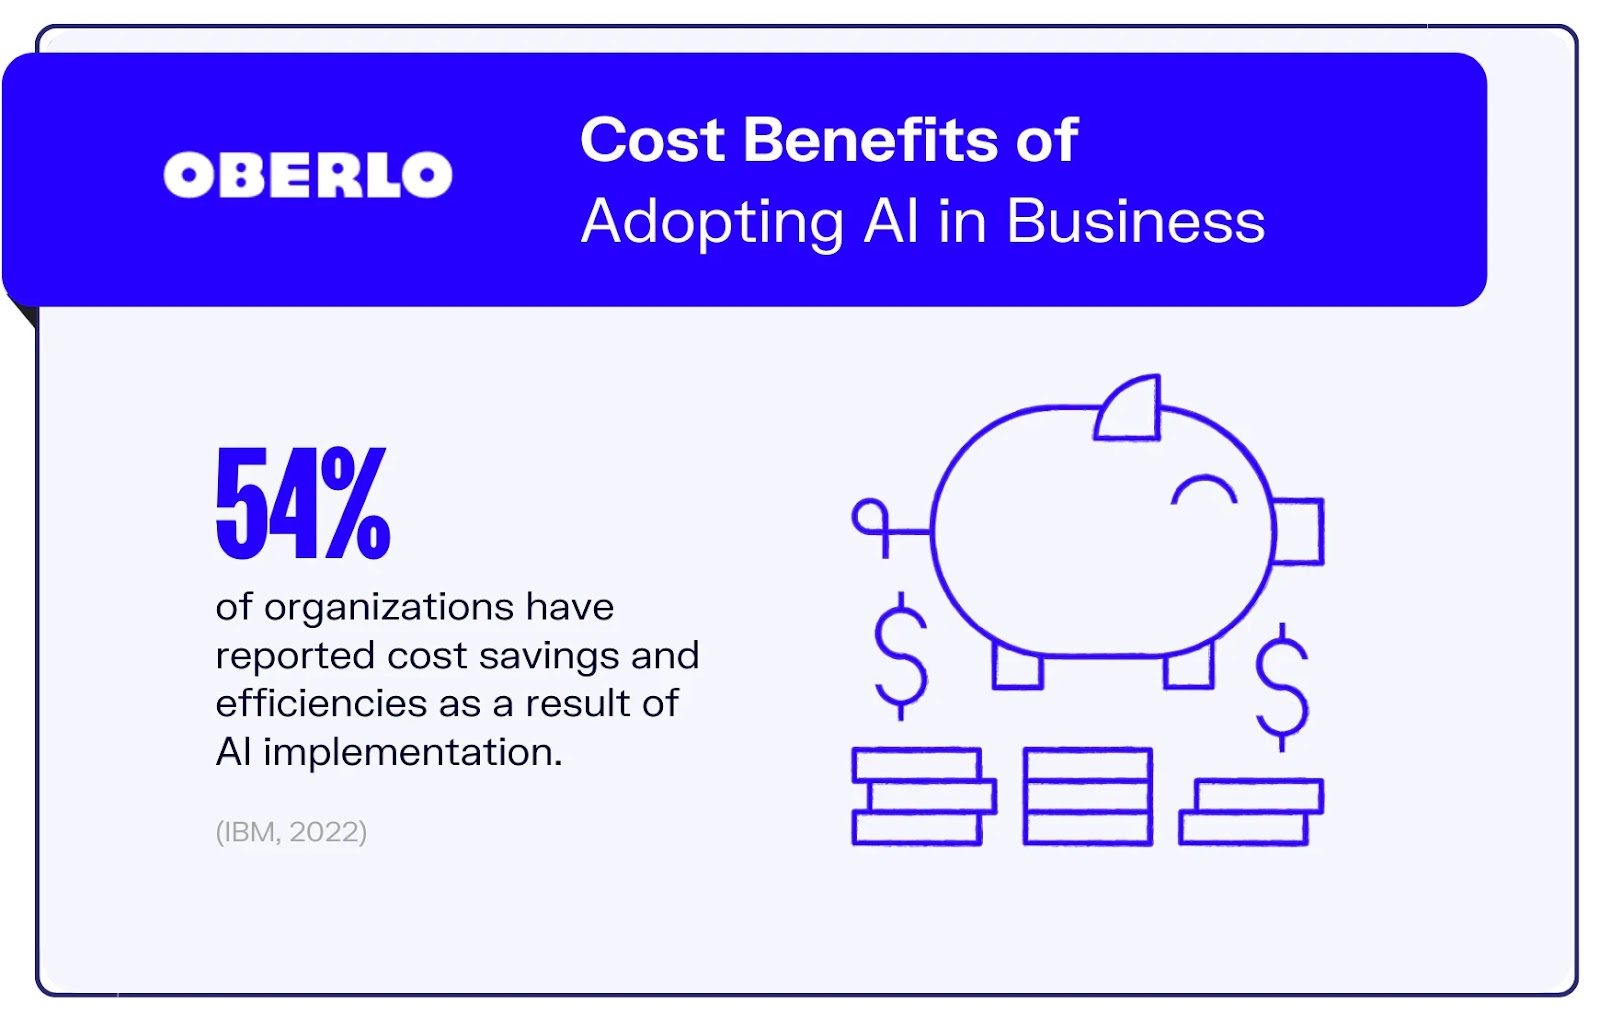 Cost Benefits of Adopting AI in Business